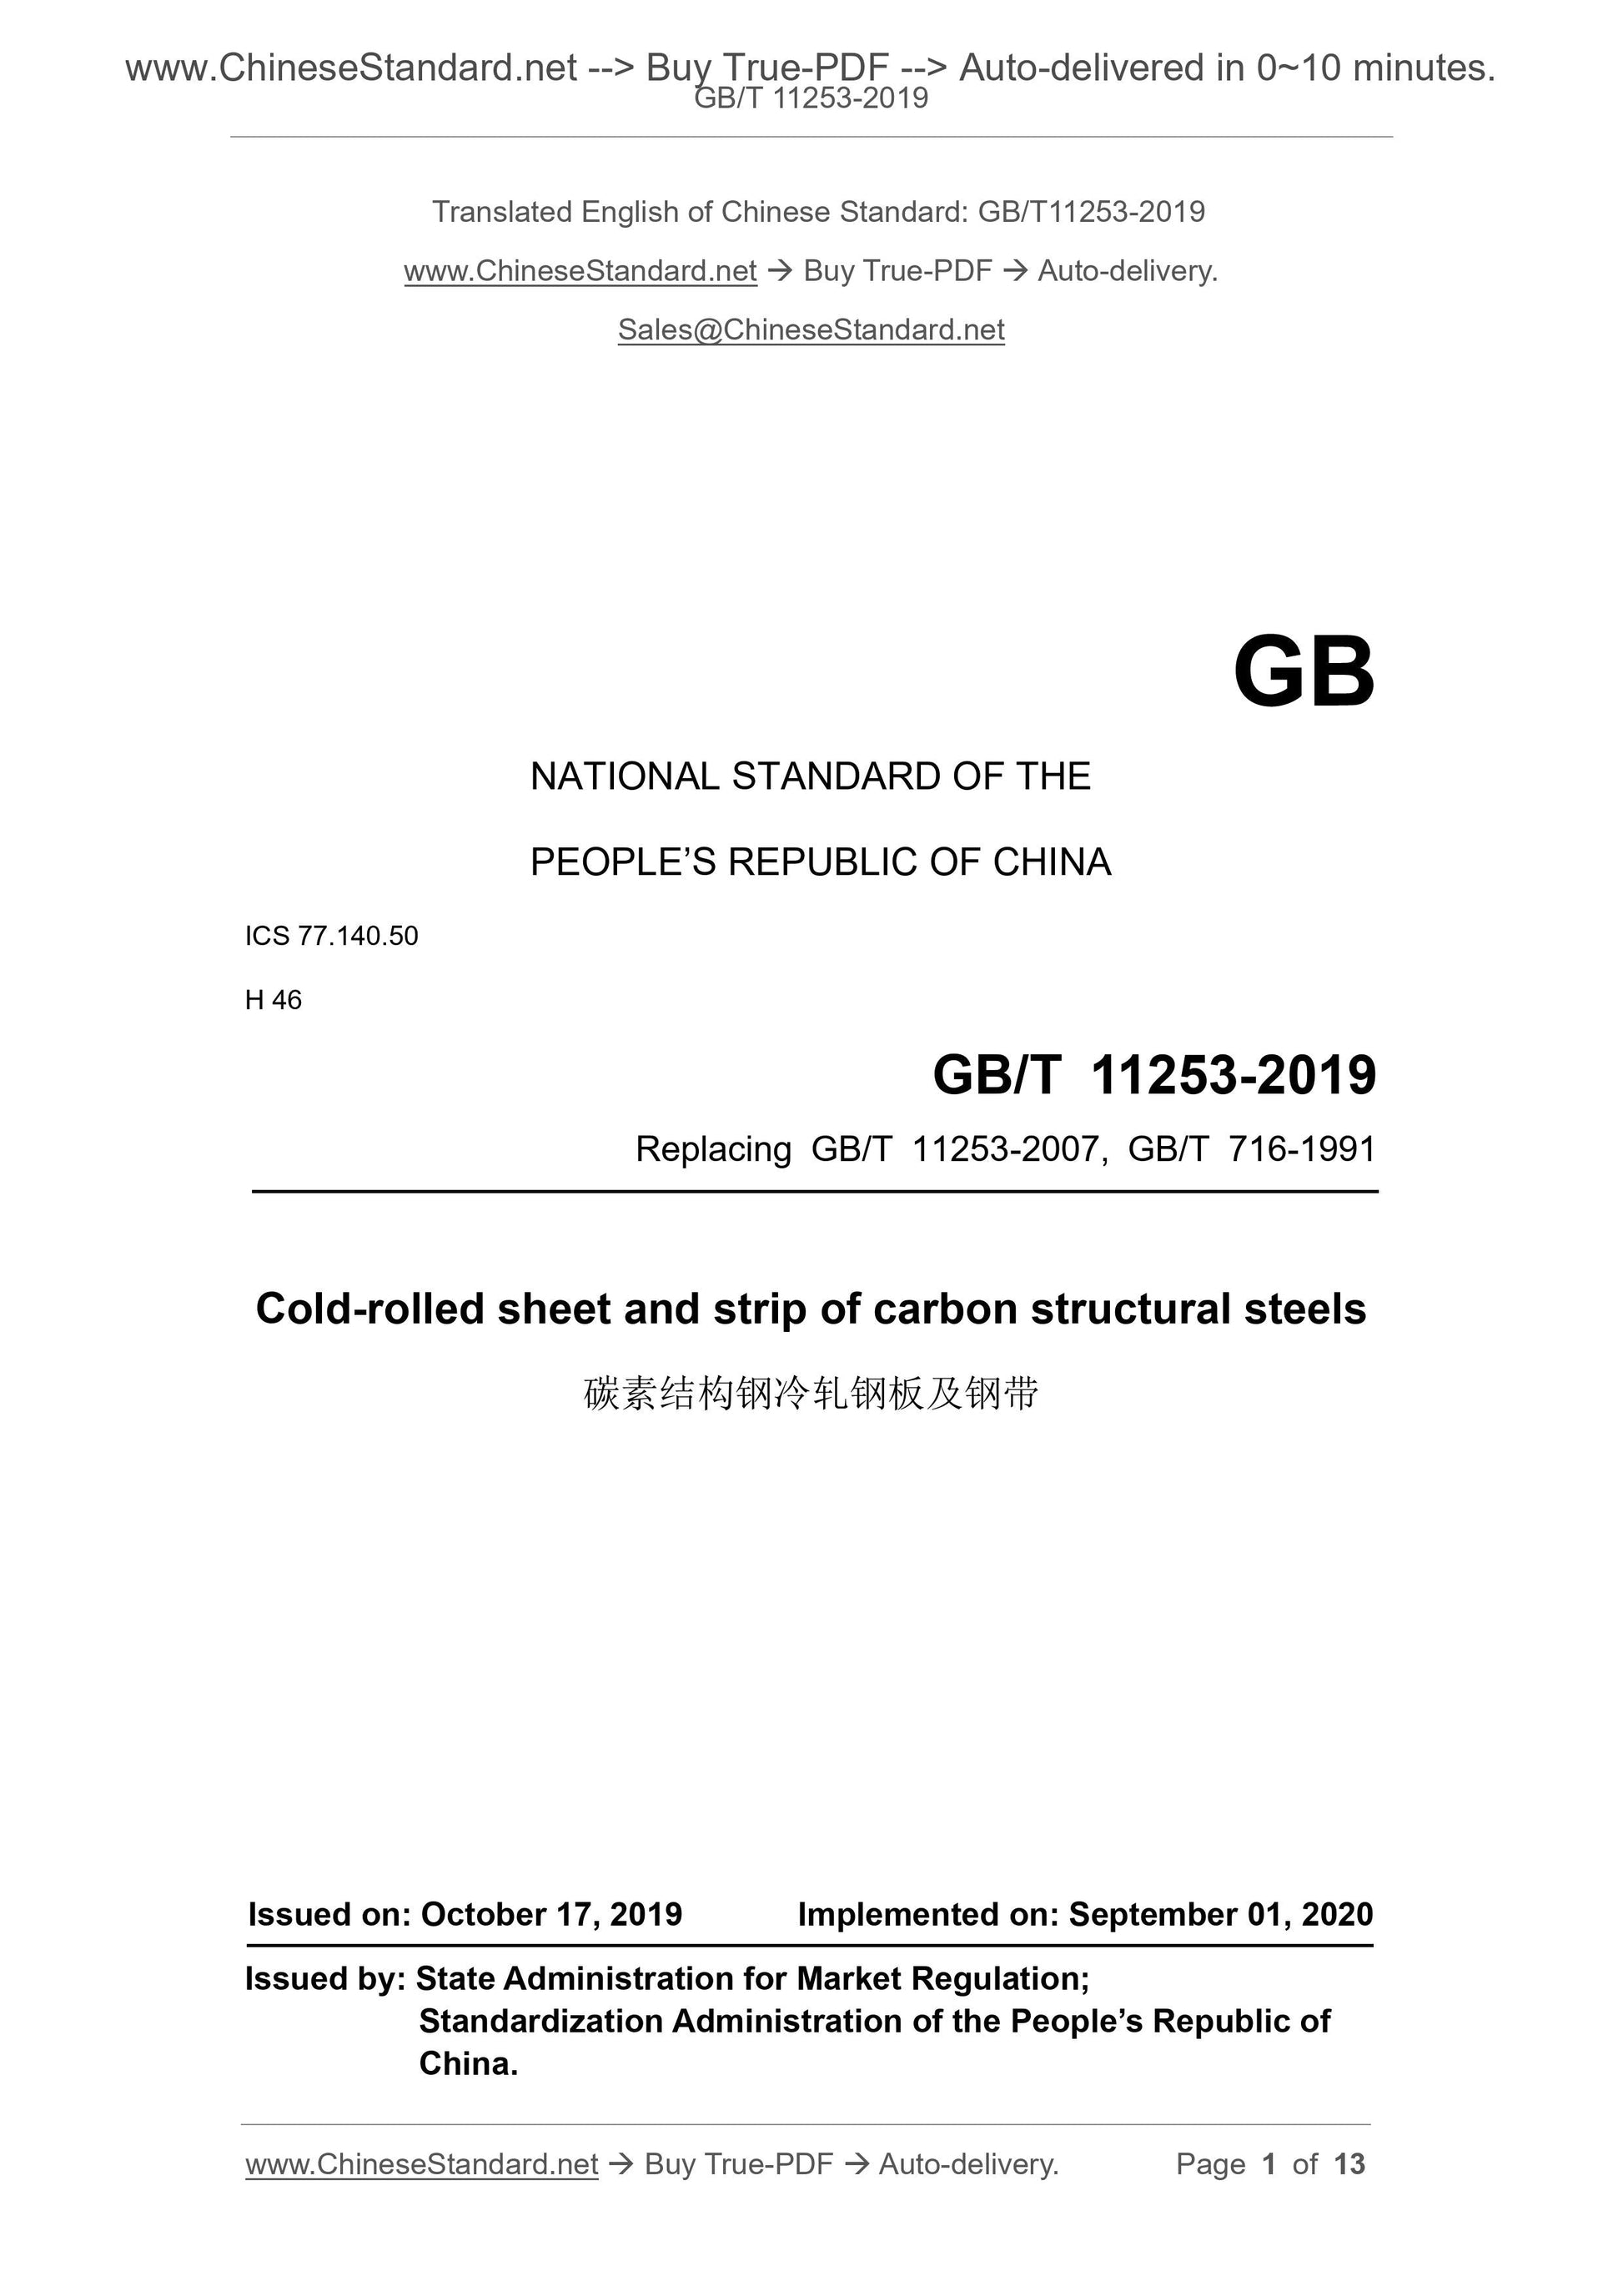 GB/T 11253-2019 Page 1